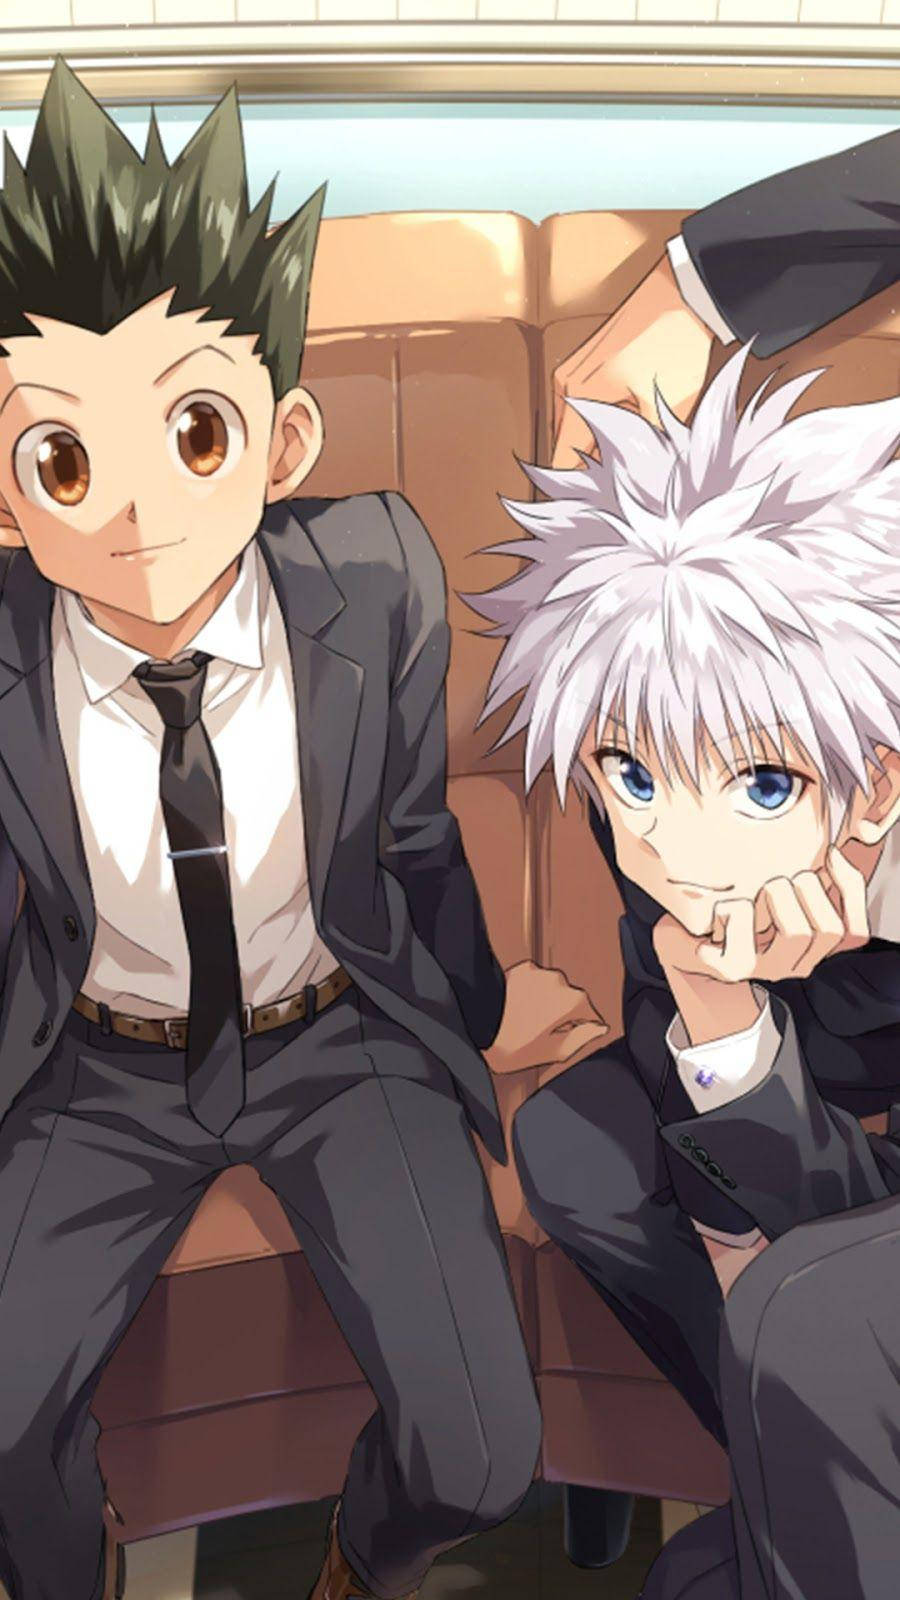 Gon And Killua Sitting In Suits Wallpaper